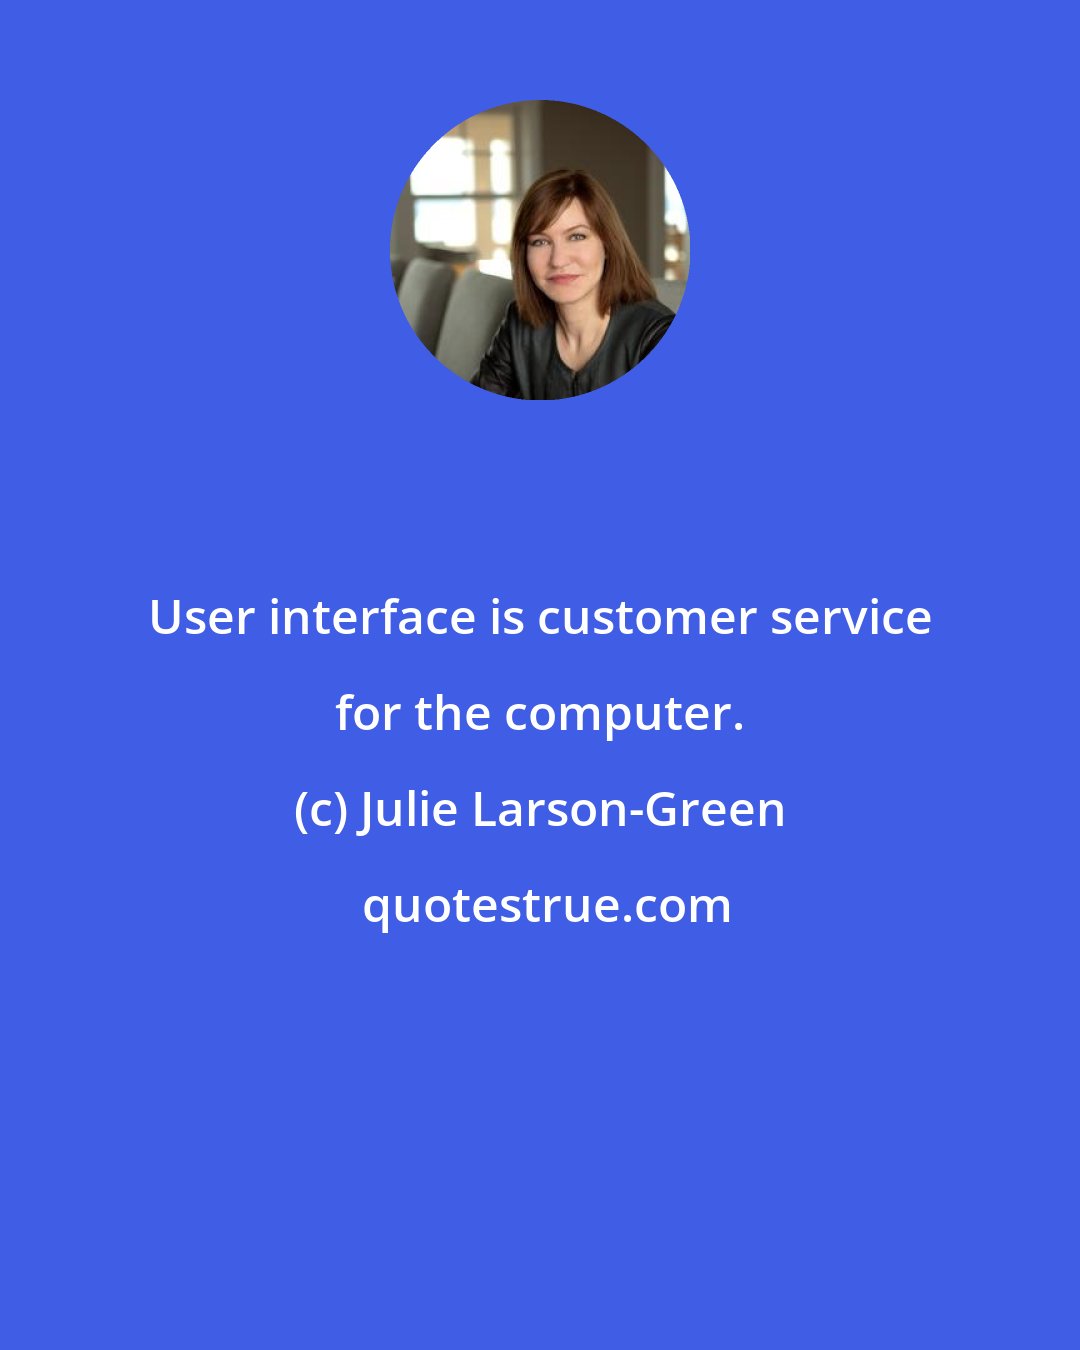 Julie Larson-Green: User interface is customer service for the computer.